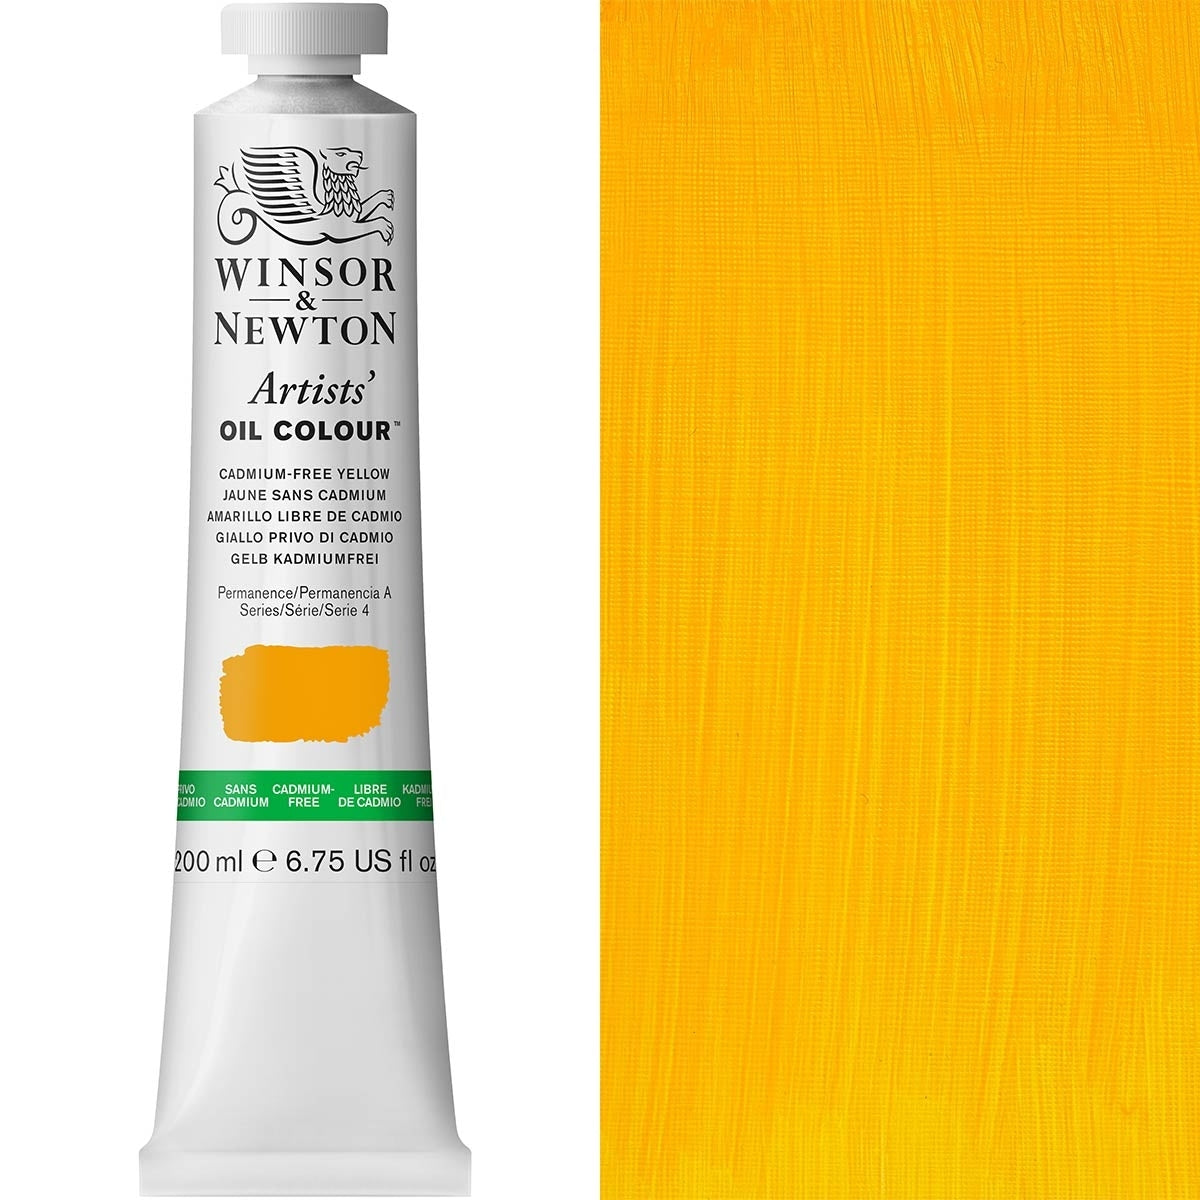 Winsor and Newton - Artists' Oil Colour - 200ml - Cad Free Yellow